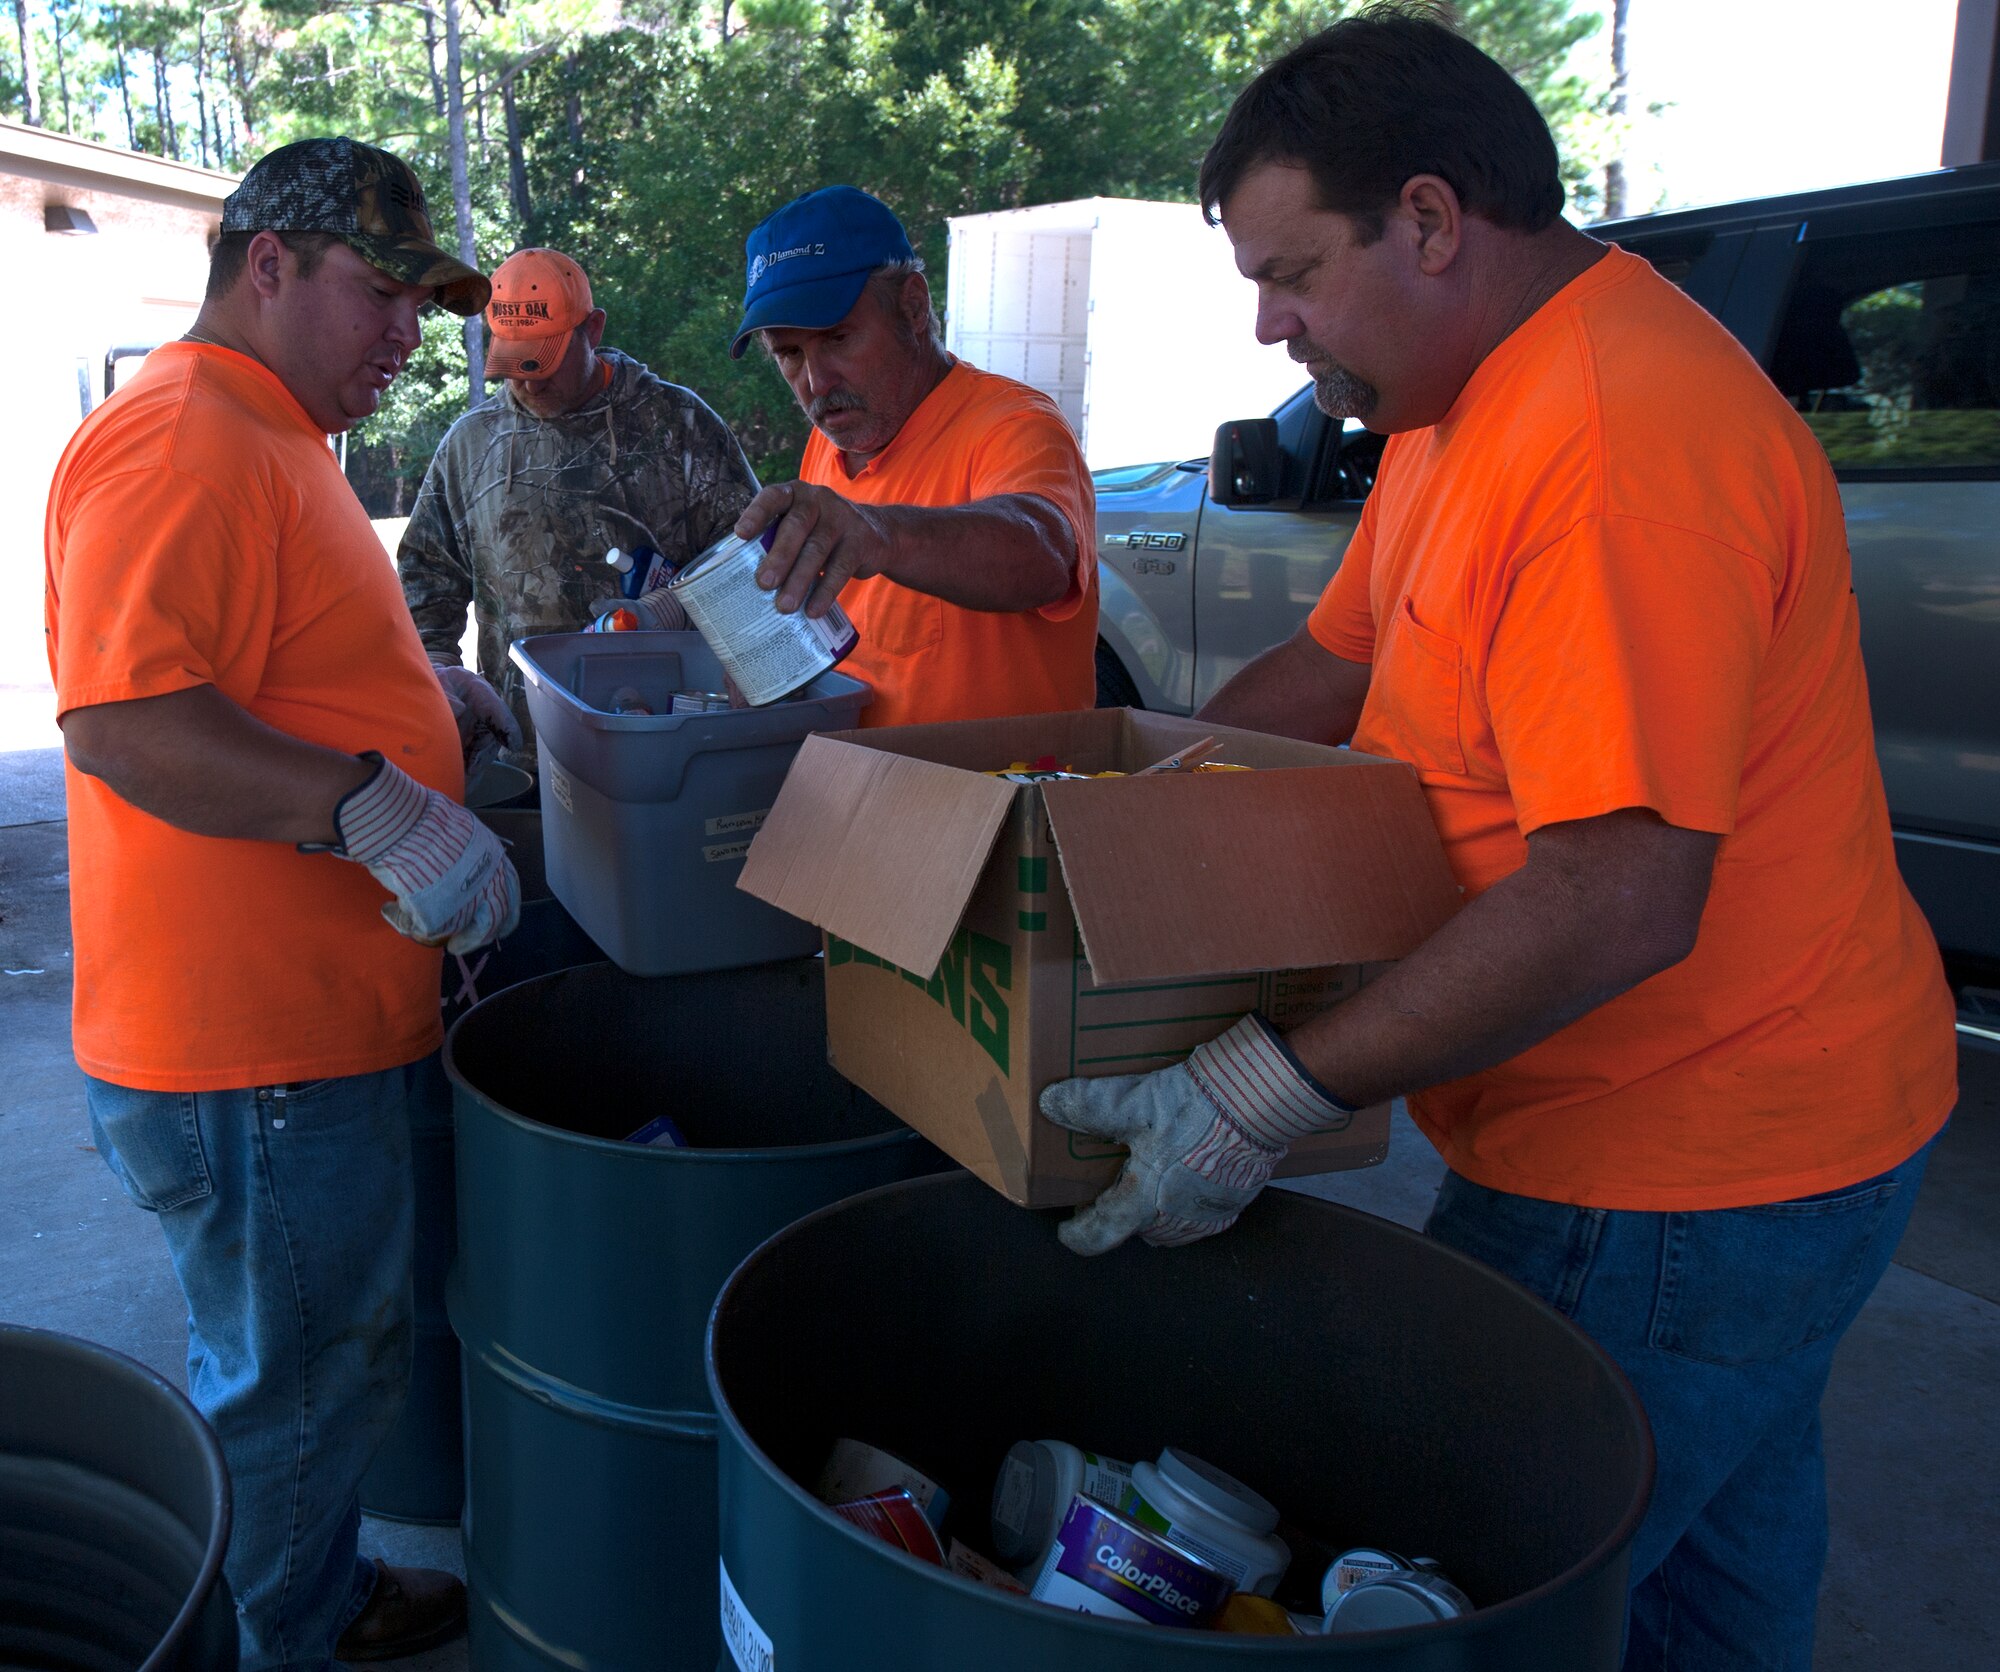 Okaloosa County Hazardous Waste workers sort recyclable household goods during a Household Hazardous Waste Collection Day at Hurlburt Field, Fla., Oct. 24, 2014. Tires, explosives and large appliances were not accepted at this event. (U.S. Air Force photo/Senior Airman Kentavist P. Brackin)